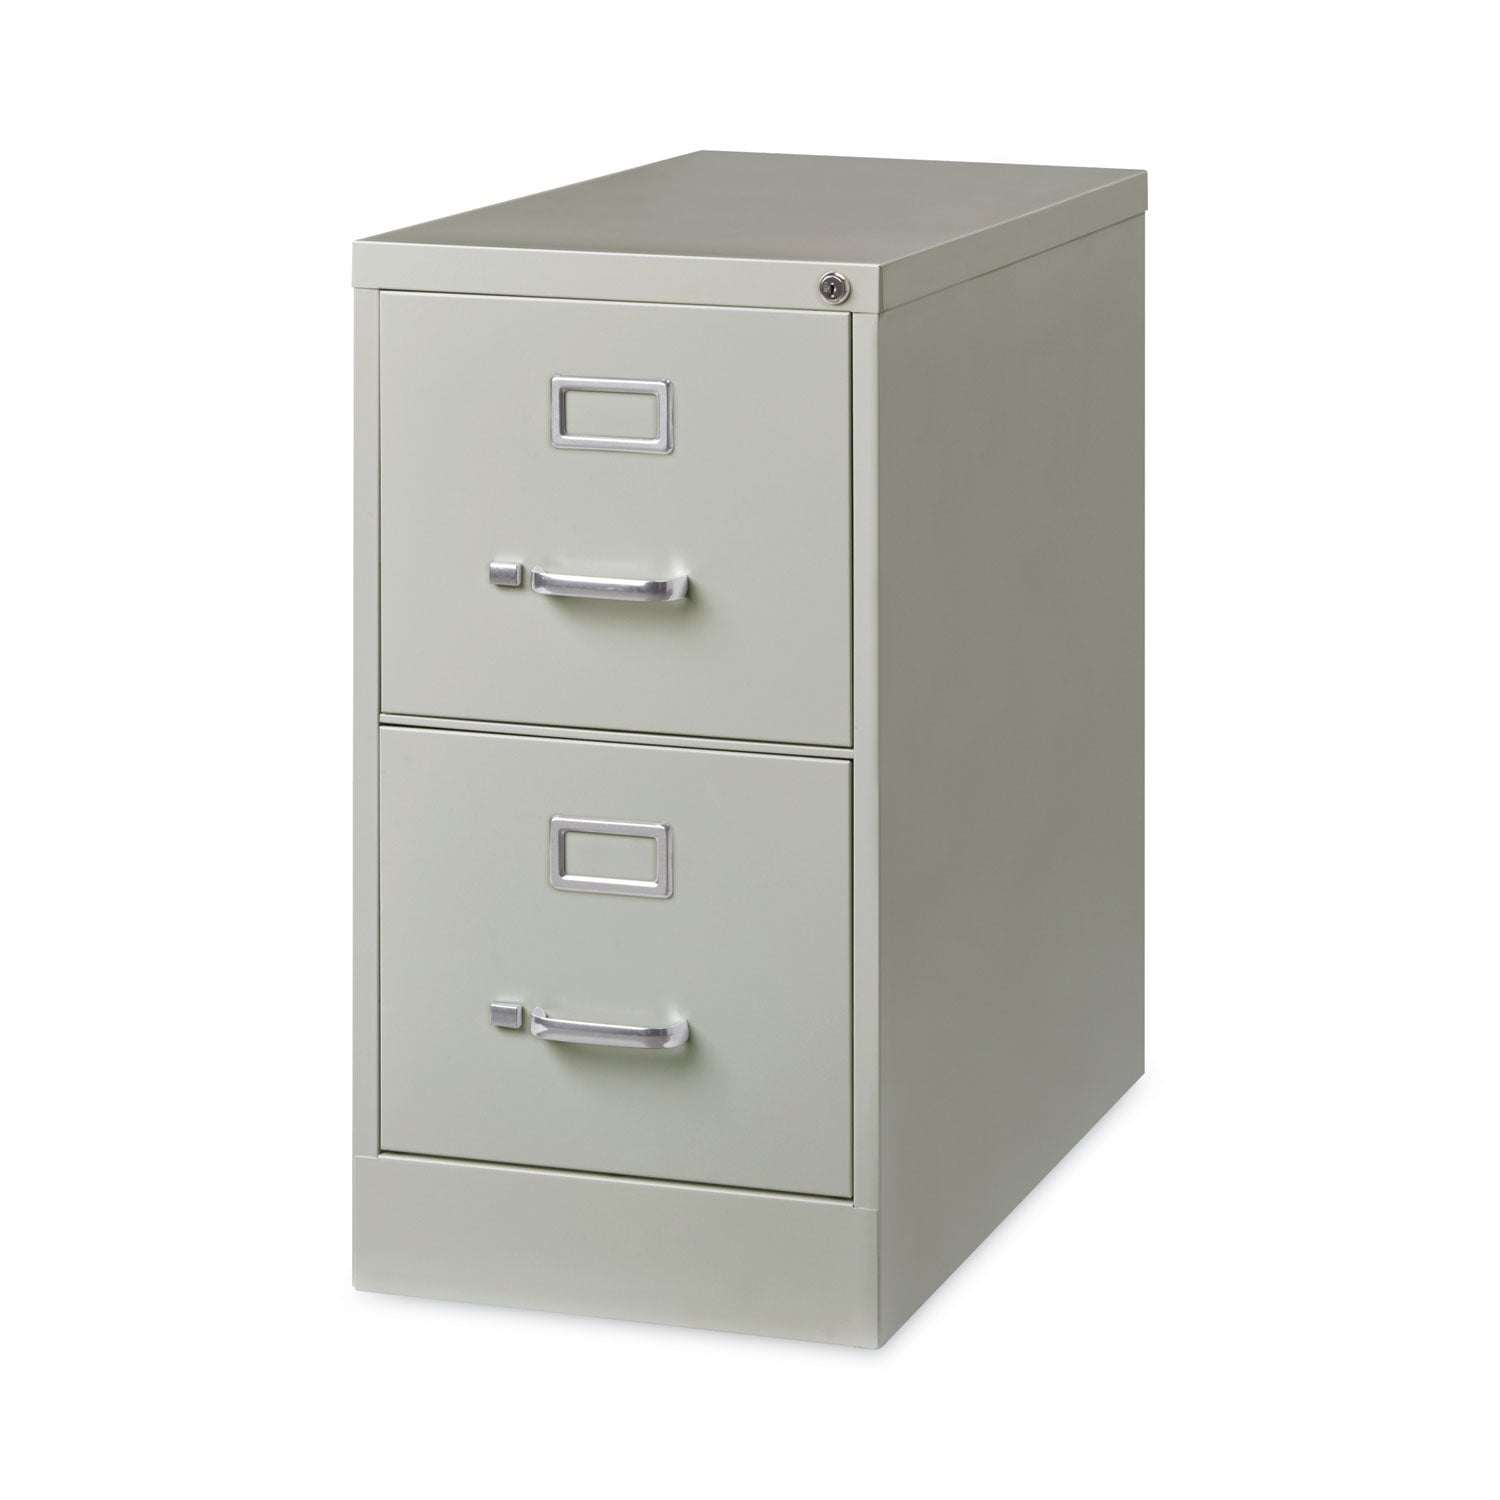 vertical-letter-file-cabinet-2-letter-size-file-drawers-light-gray-15-x-265-x-2837_hid14027 - 3